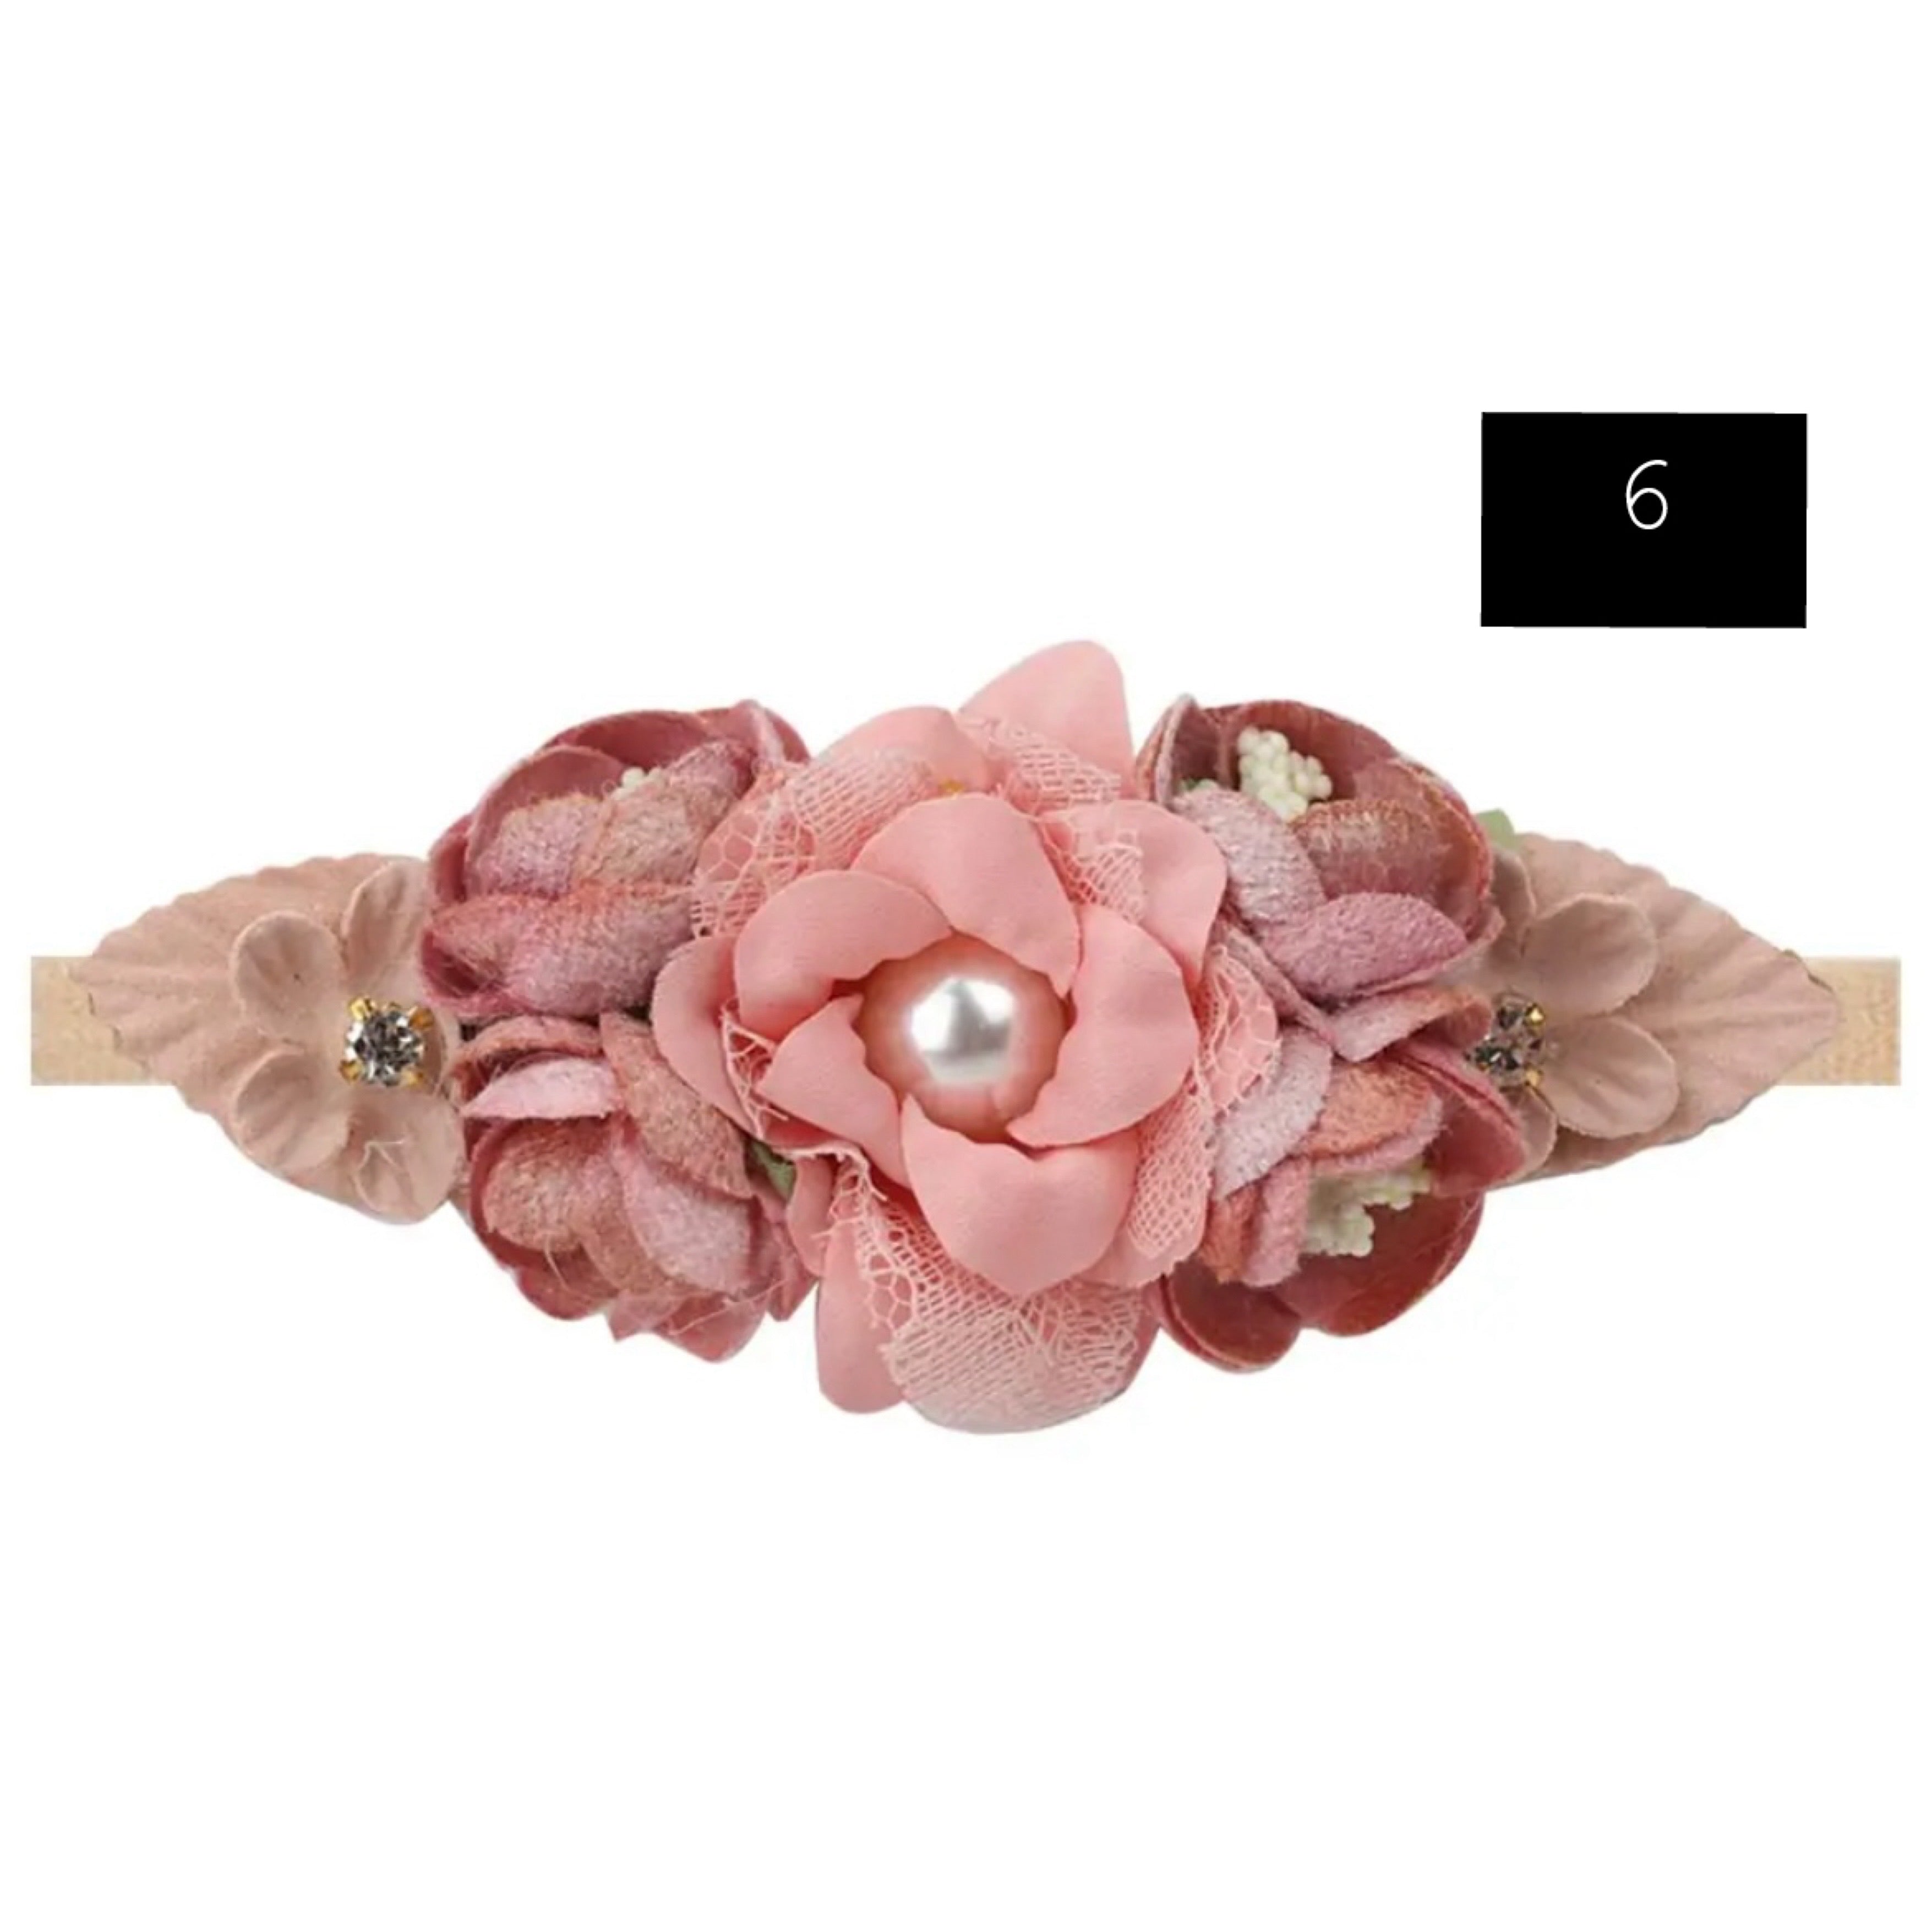 Floral Hairpiece (Nylons & Clips)